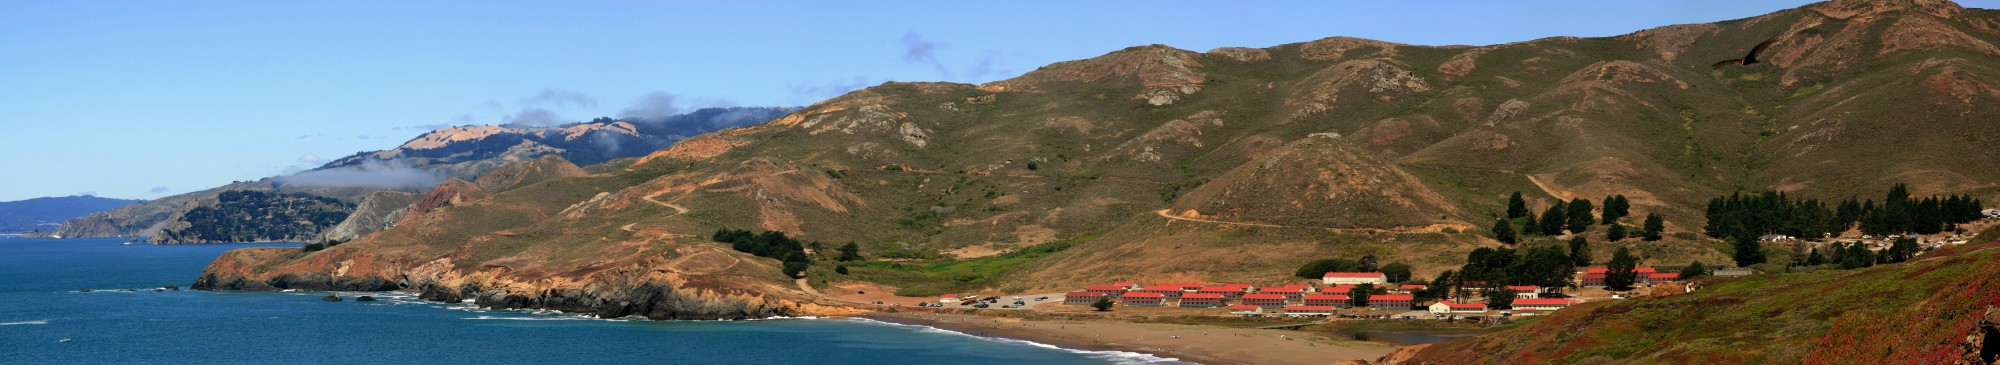 Marin Headlands with Rodeo Beach